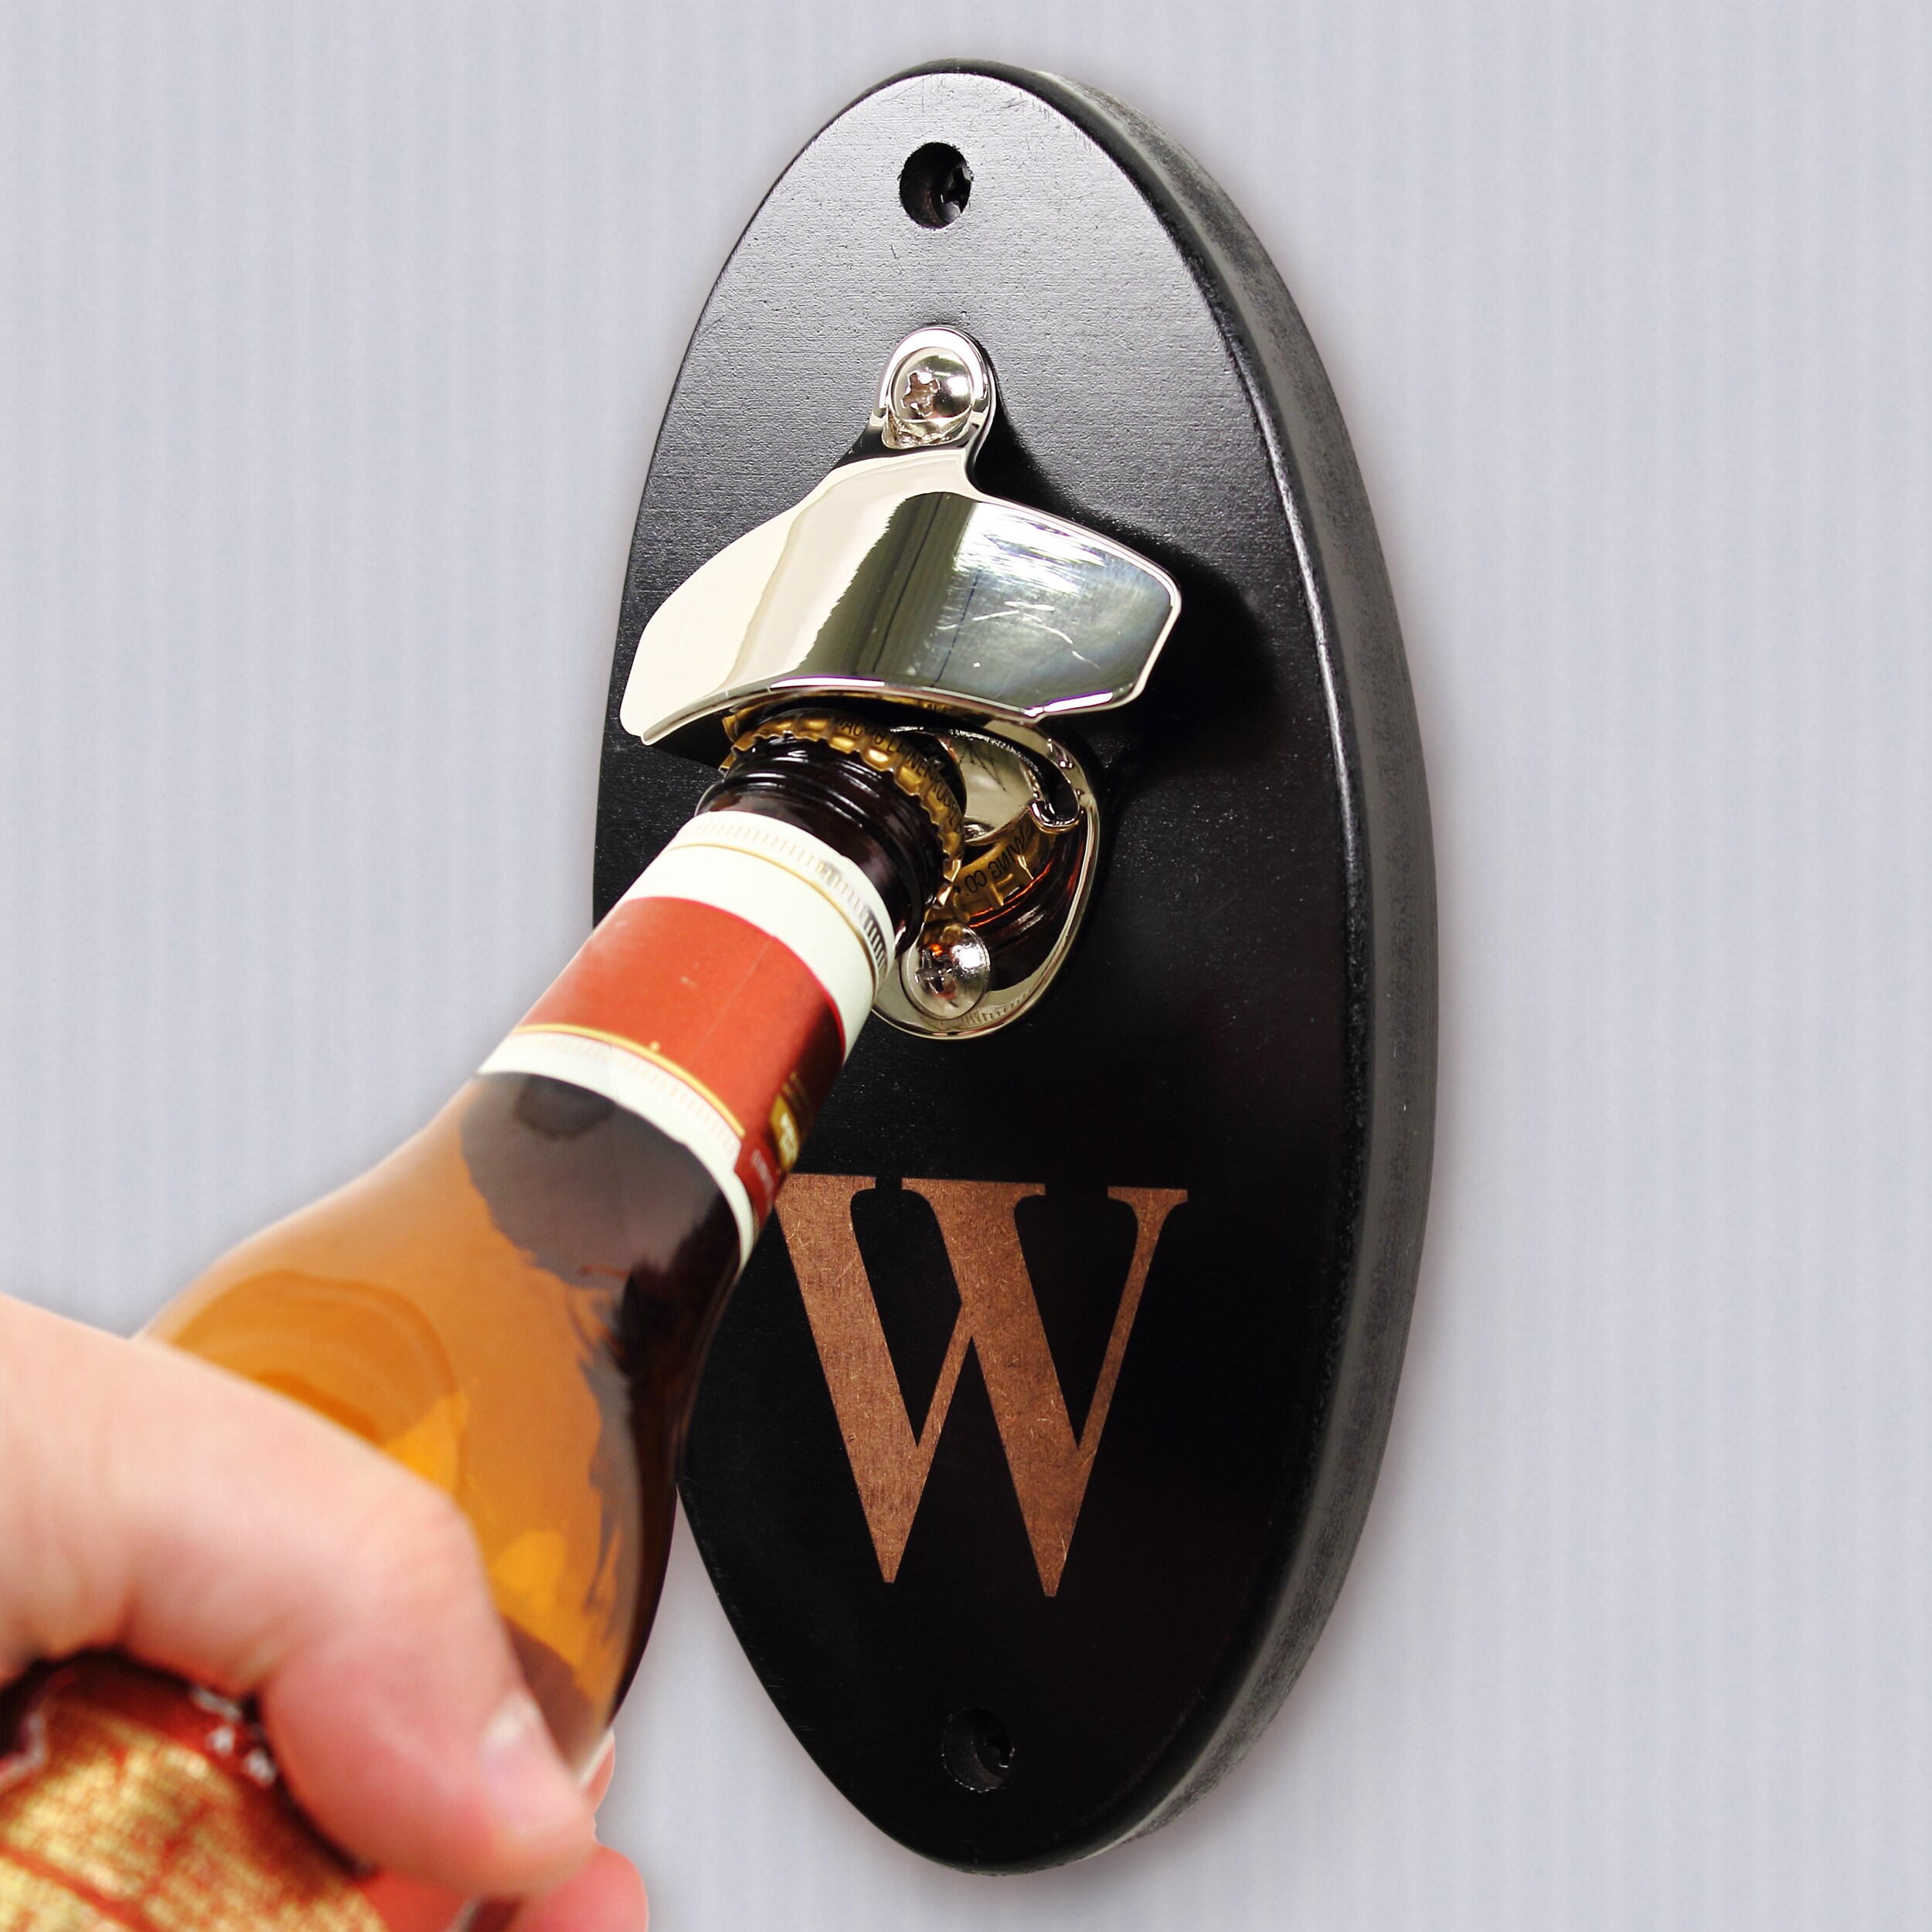 Personalized Wall Mounted Bottle Opener Overstock Shopping Great Deals on Bar & Wine Tools